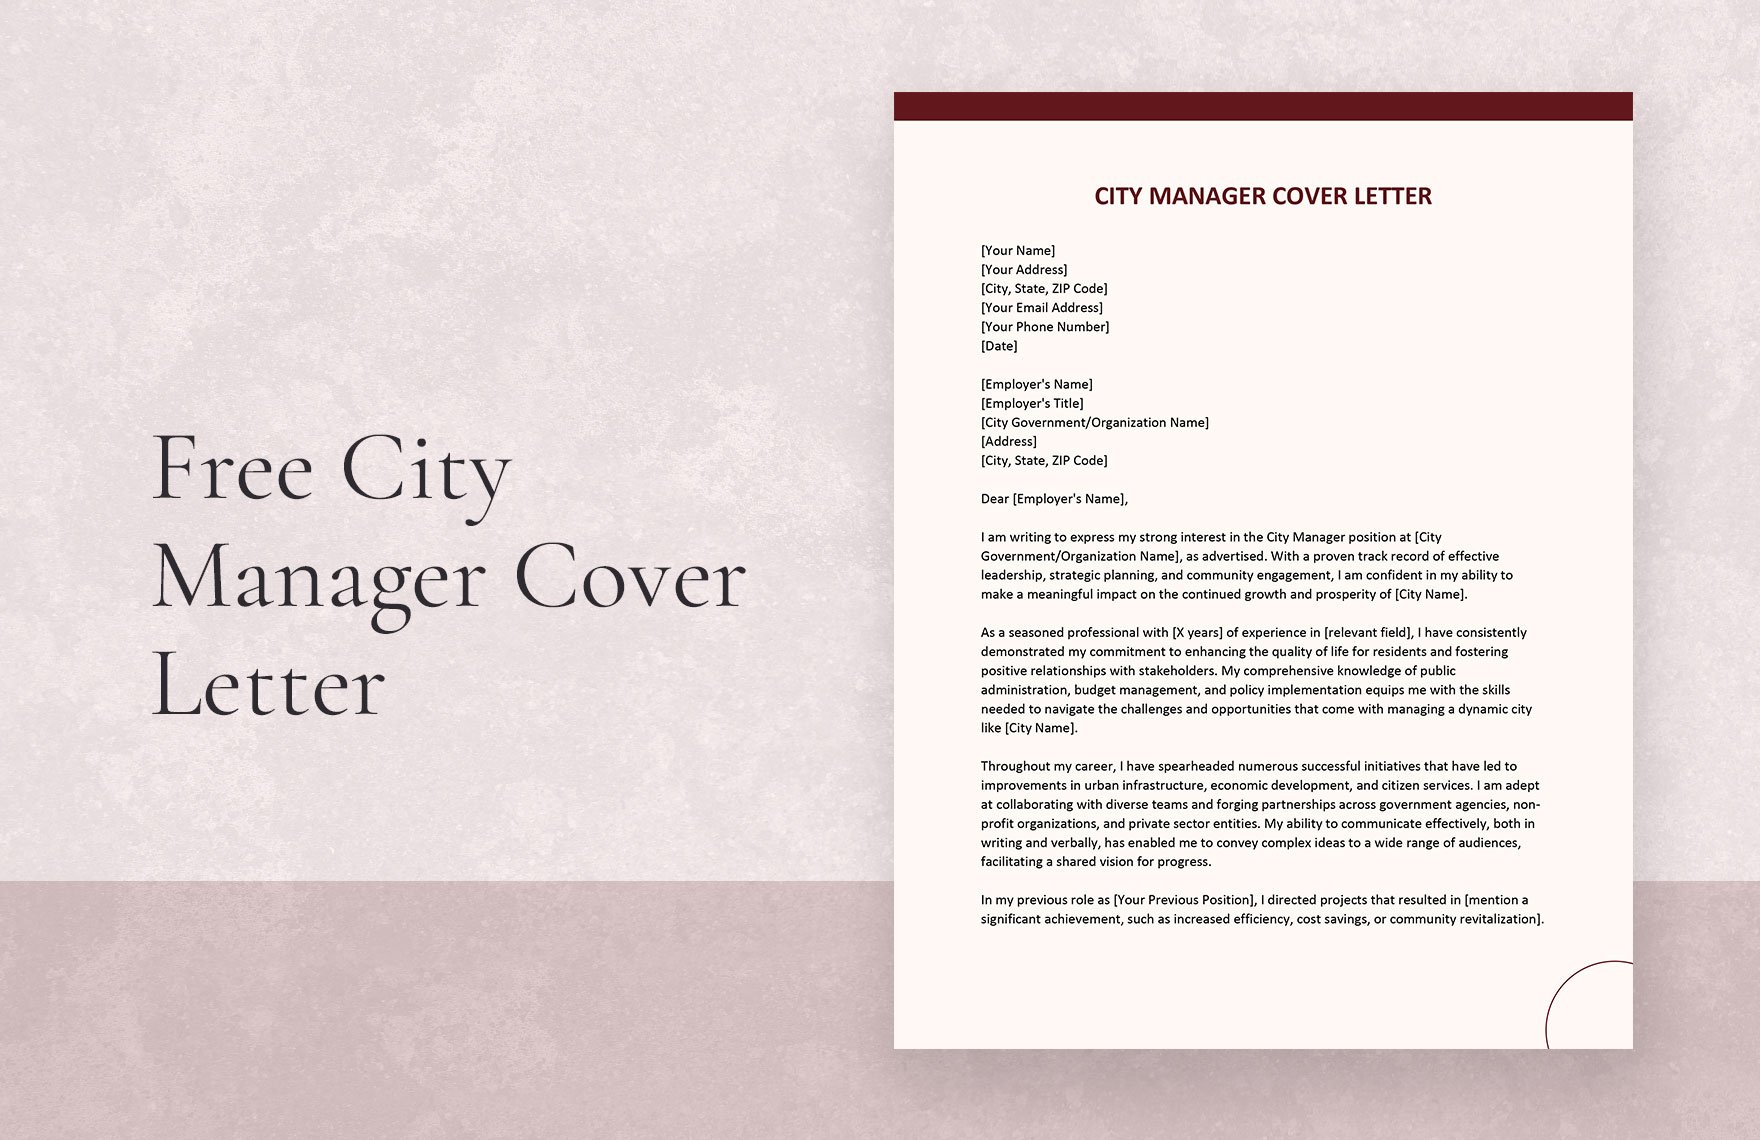 City Manager Cover Letter